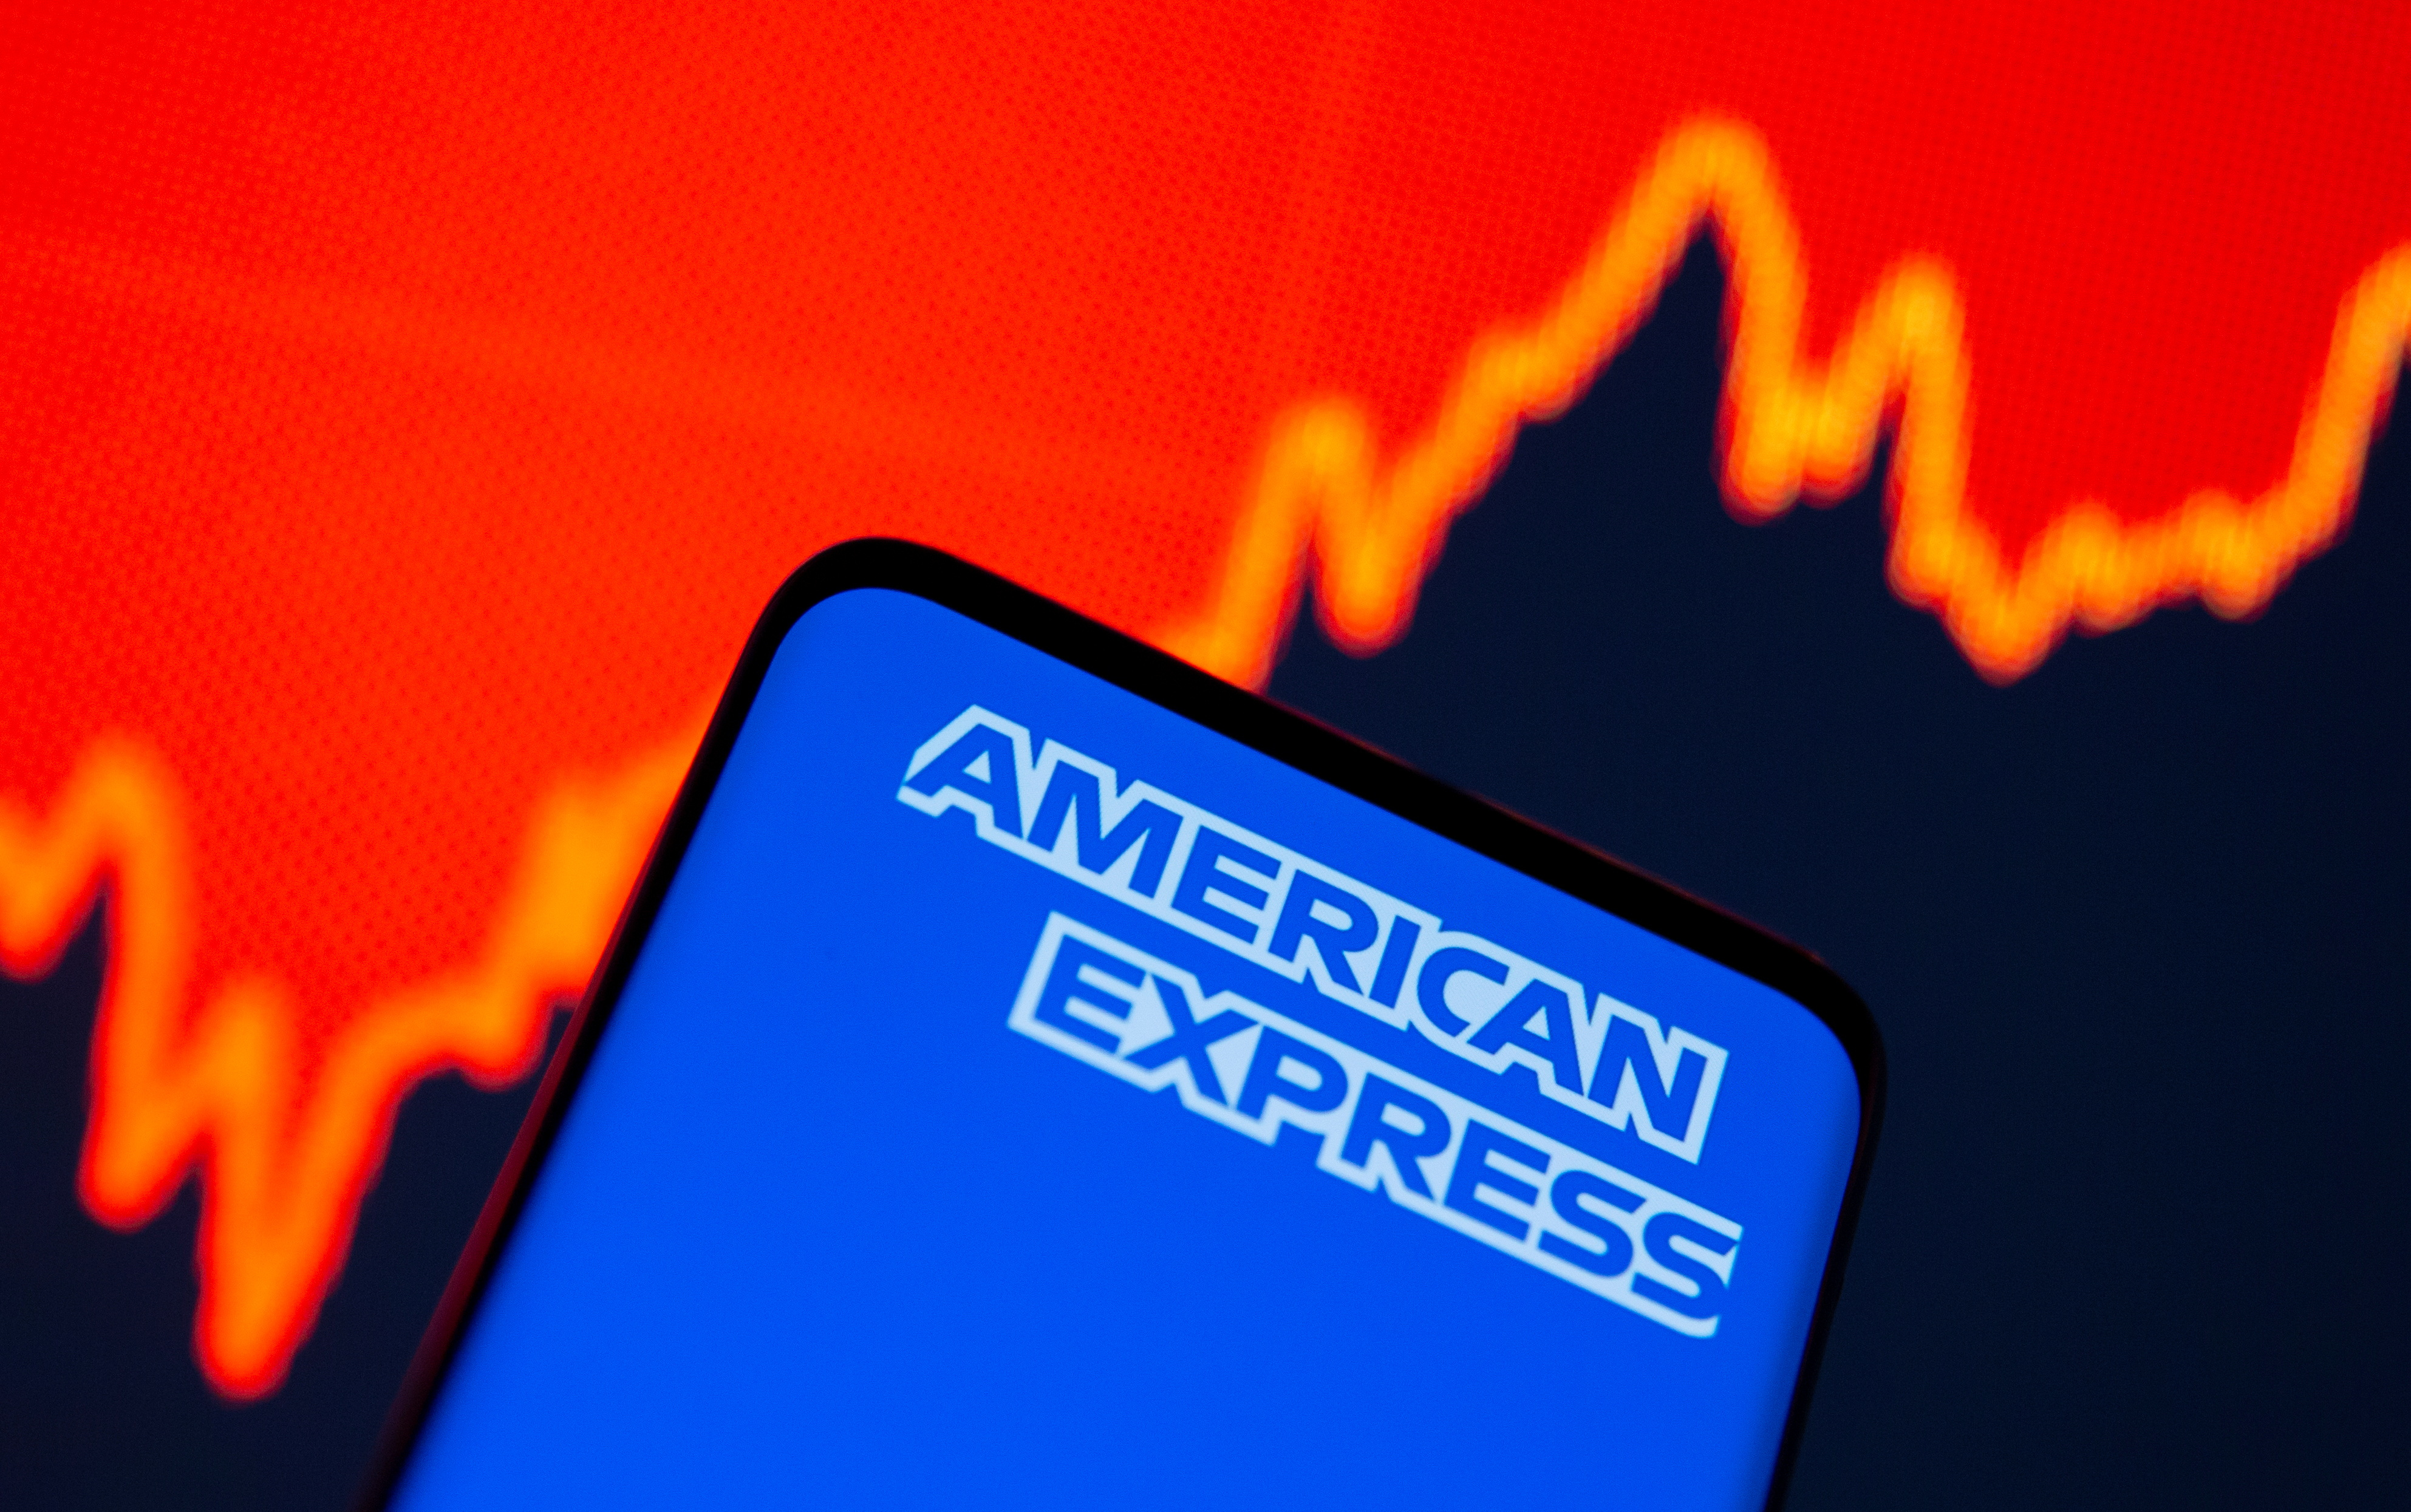 Smartphone with American Express logo is seen in front of displayed stock graph in this illustration